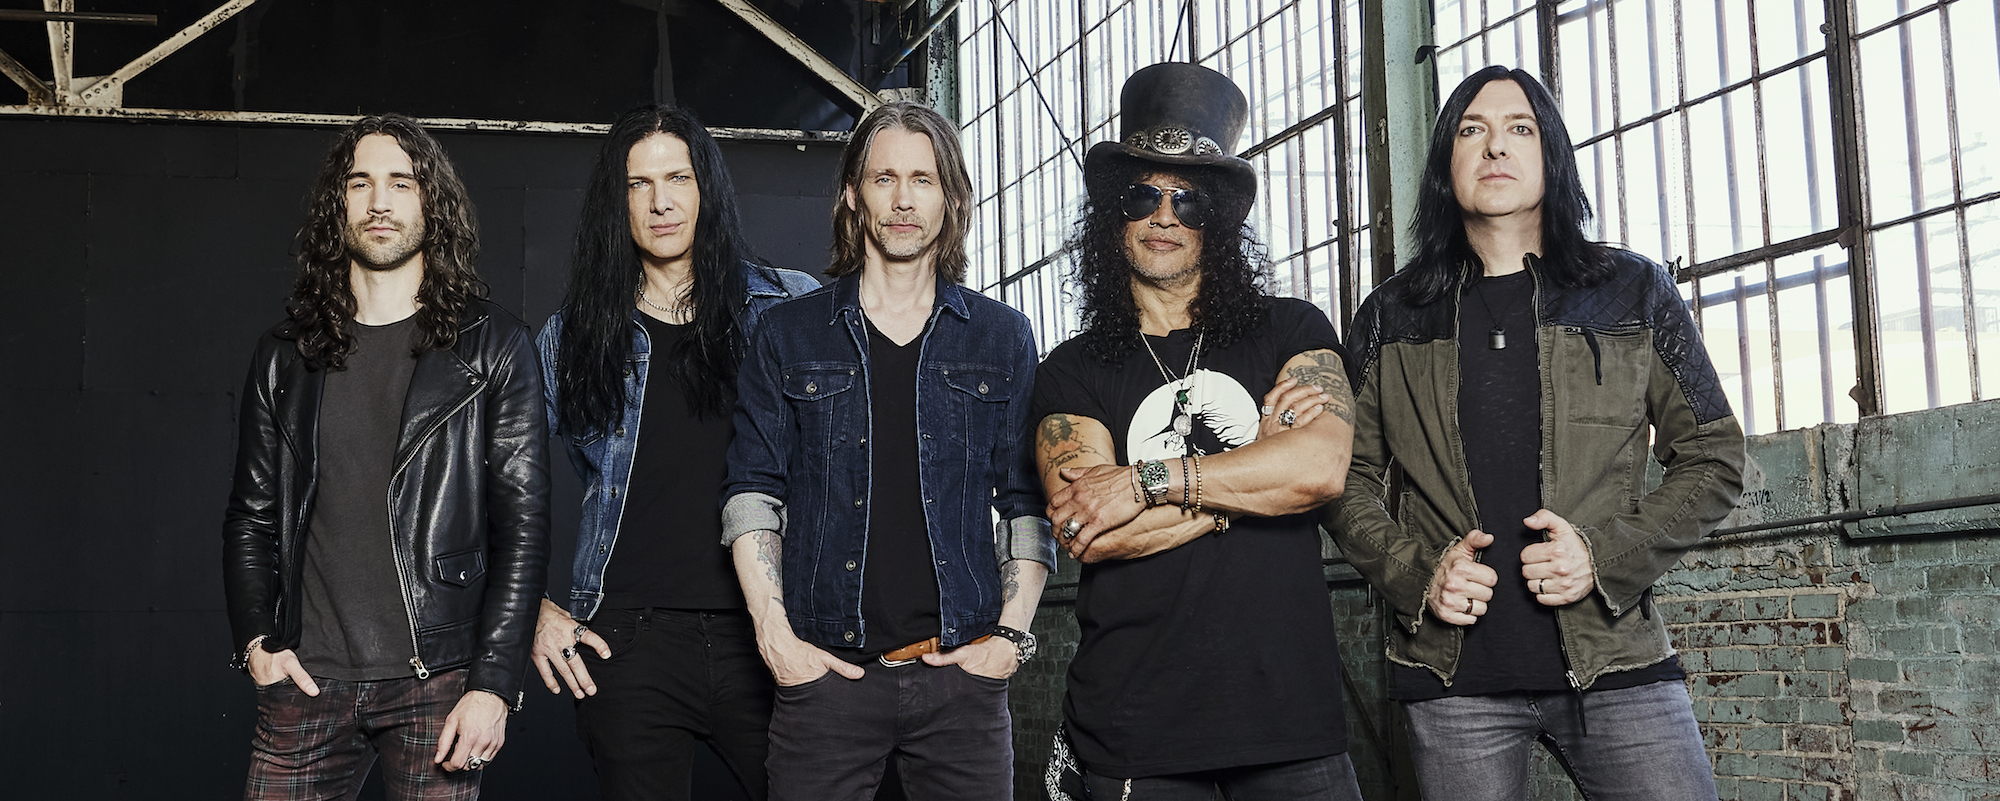 Slash and Myles Kennedy Release New Single, “Call Off The Dogs”